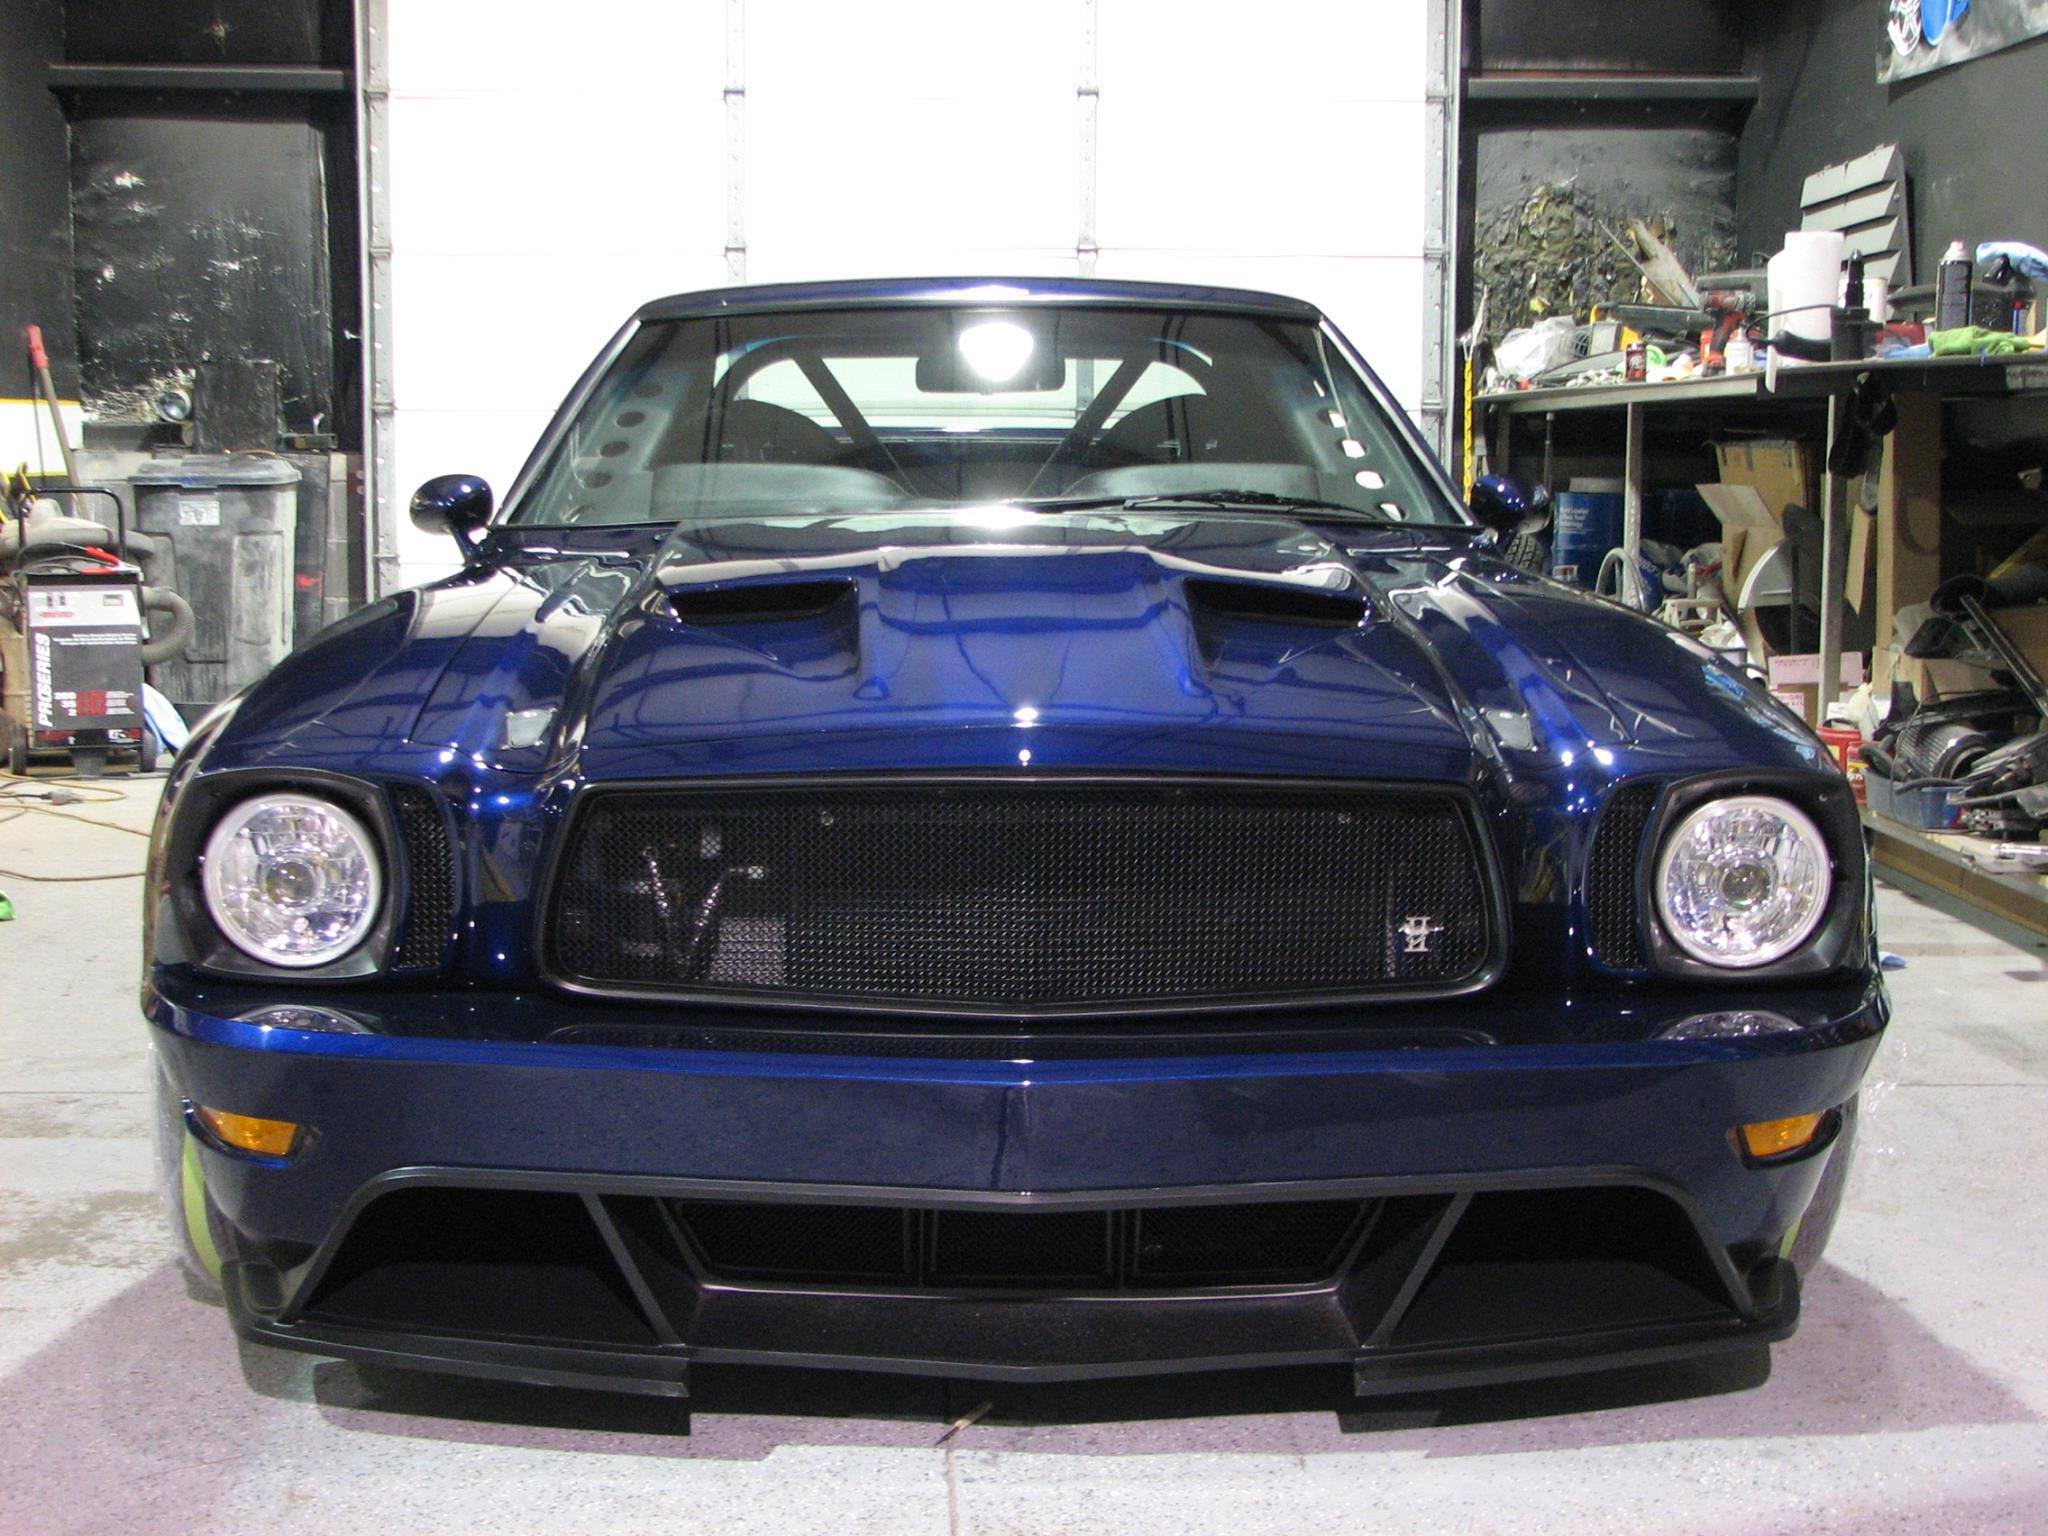 Ford Mustang Evolution II V-10 Triton Edition By A-Team Racing